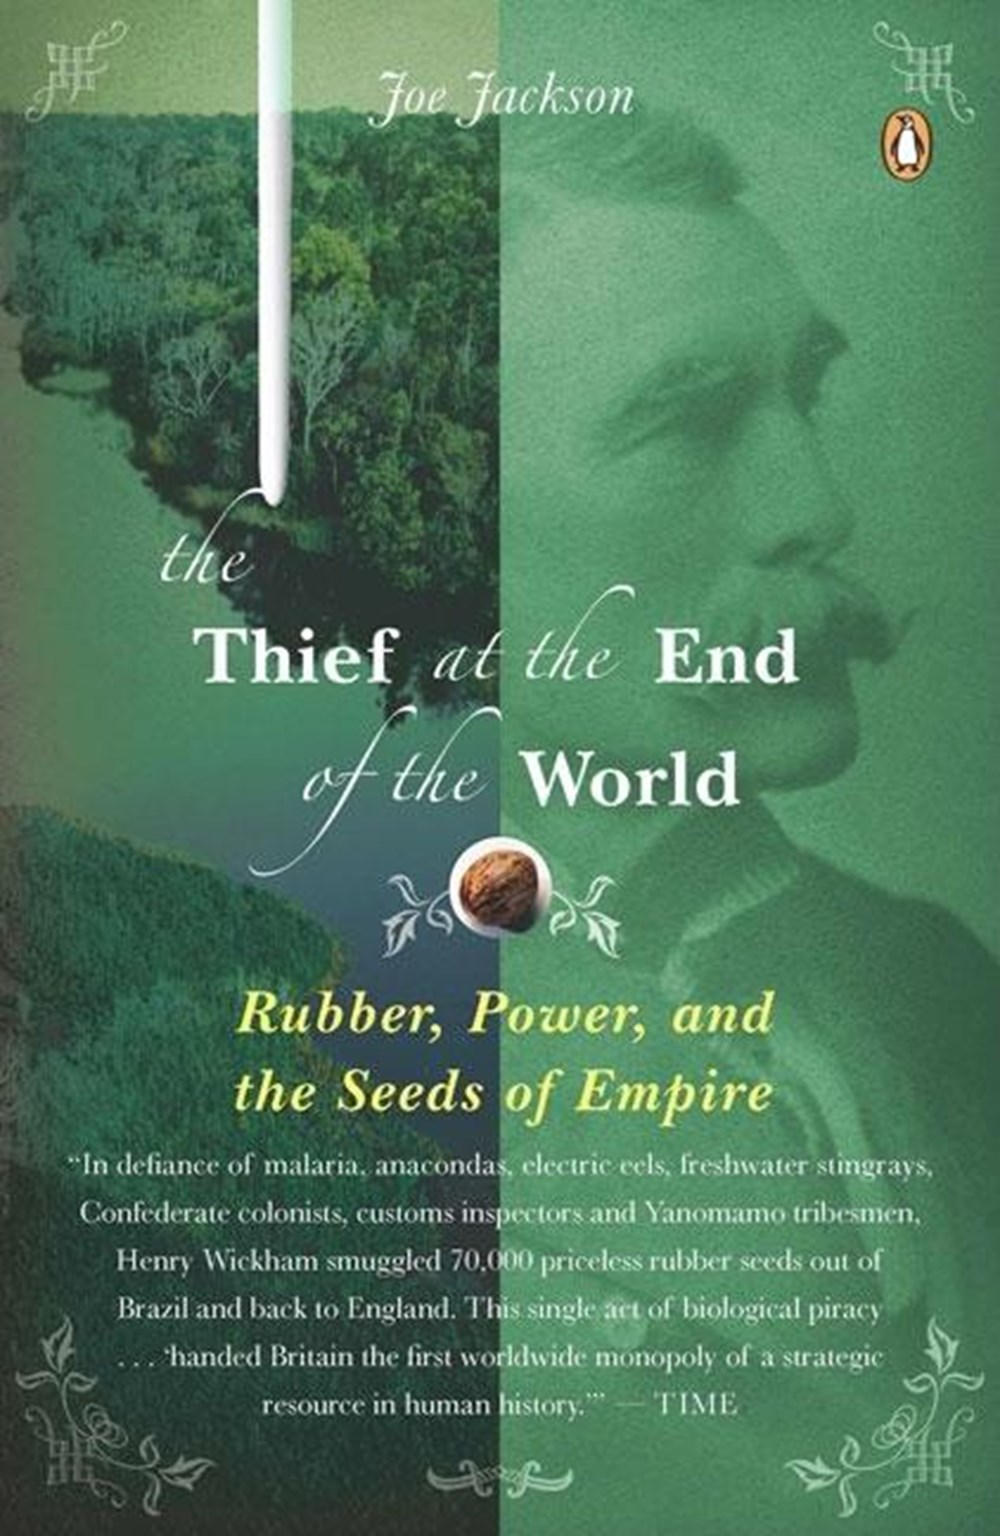 Thief at the End of the World: Rubber, Power, and the Seeds of Empire